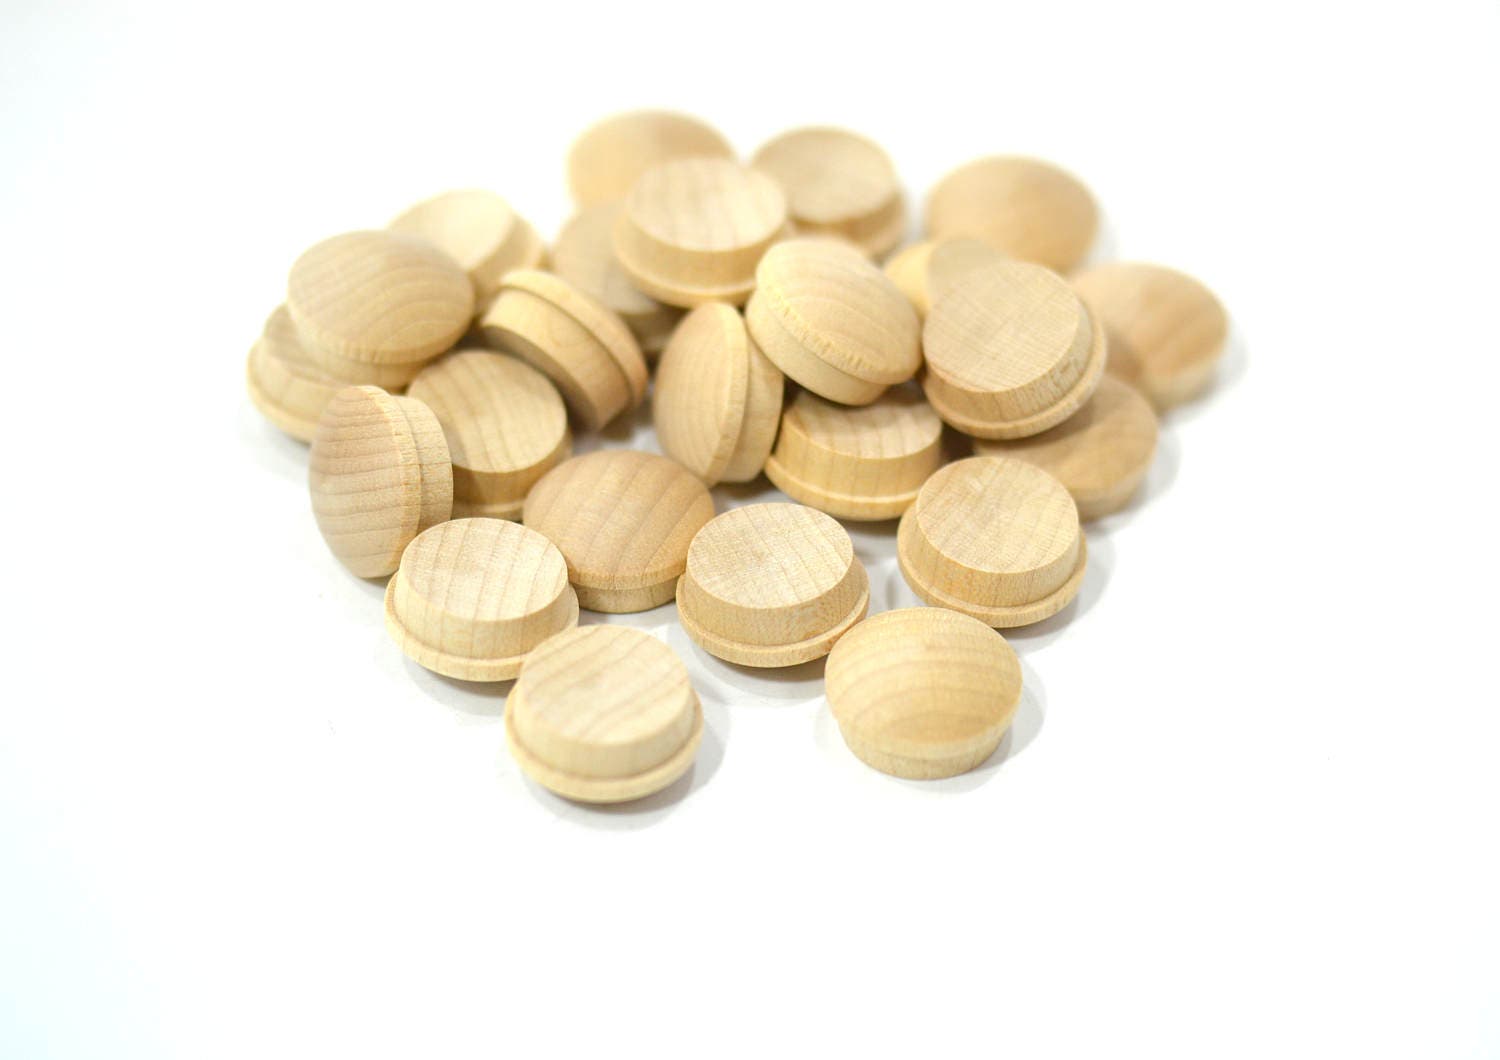 8 x 25 mm Mushroom Plugs Head Wooden Solid Covering Screw Heads FREE PP Button 